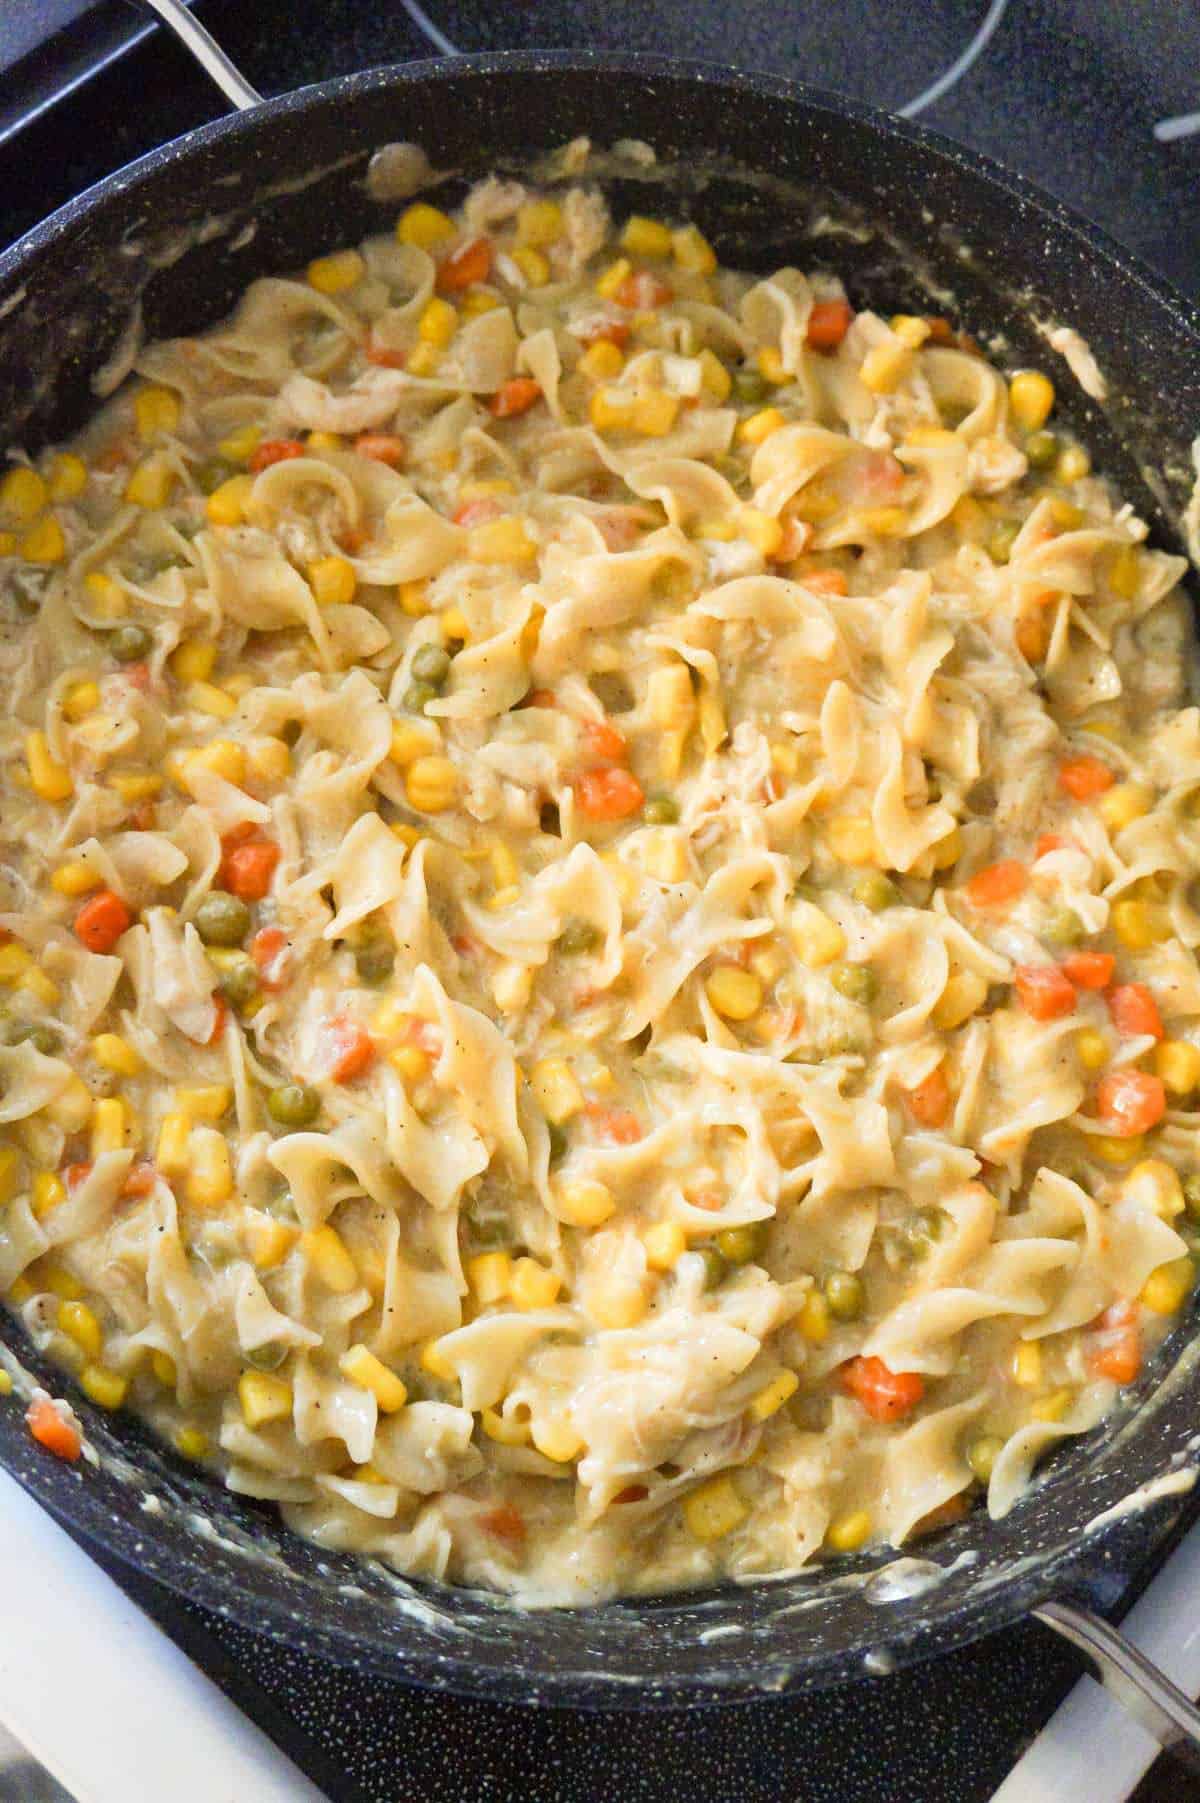 chicken noodle casserole in a pot on the stove